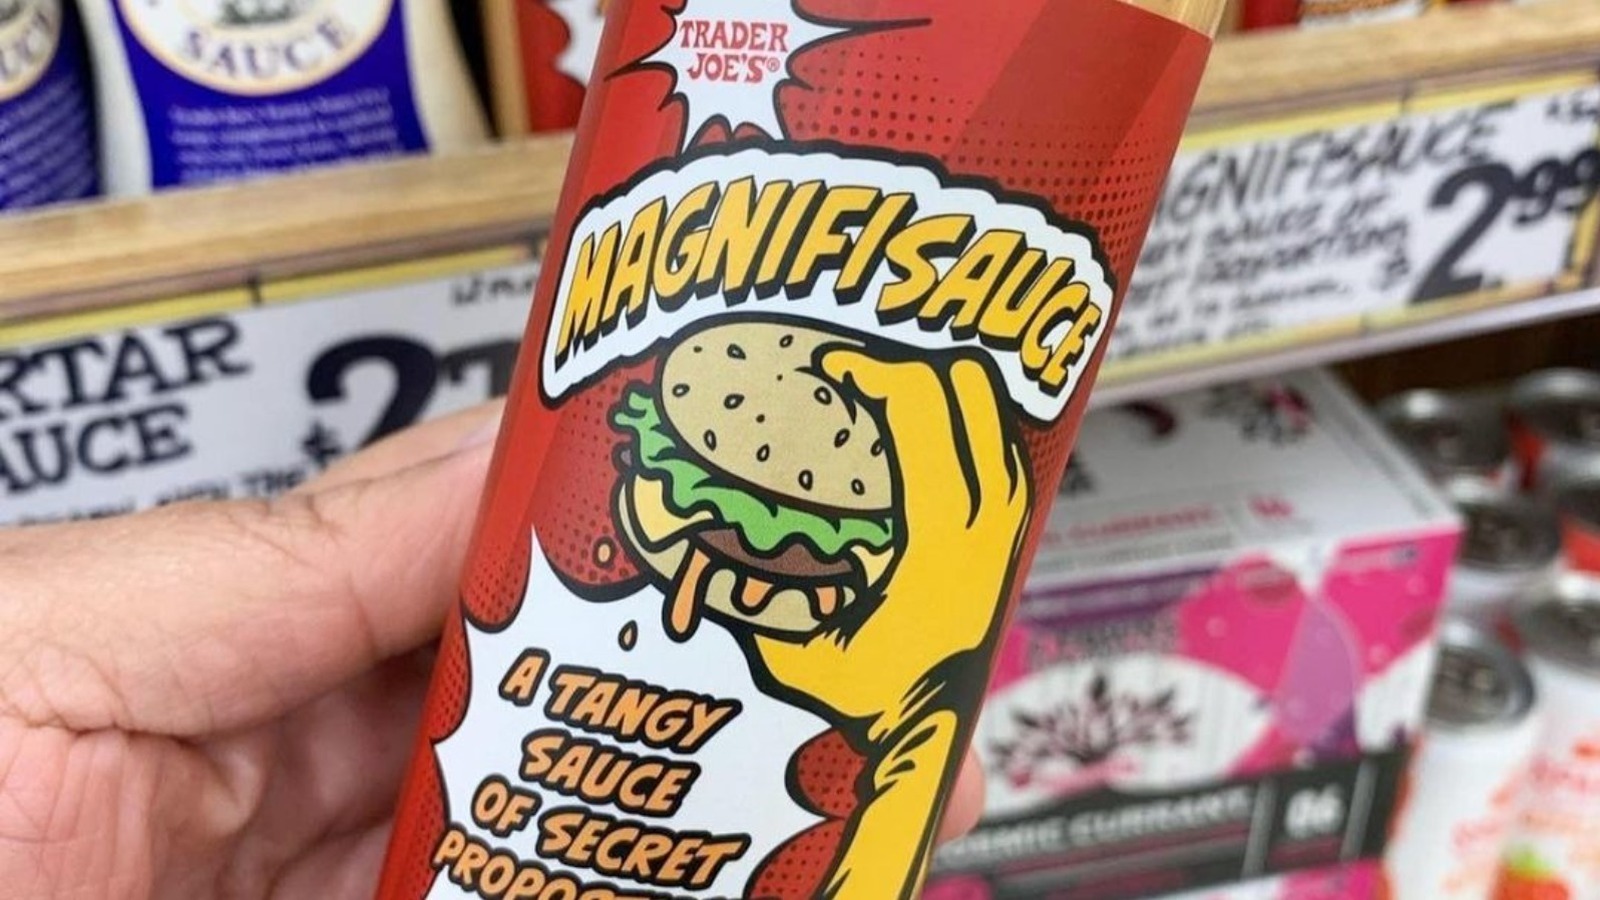 https://www.mashed.com/img/gallery/trader-joes-fans-are-freaking-out-about-this-new-secret-sauce/l-intro-1611658687.jpg